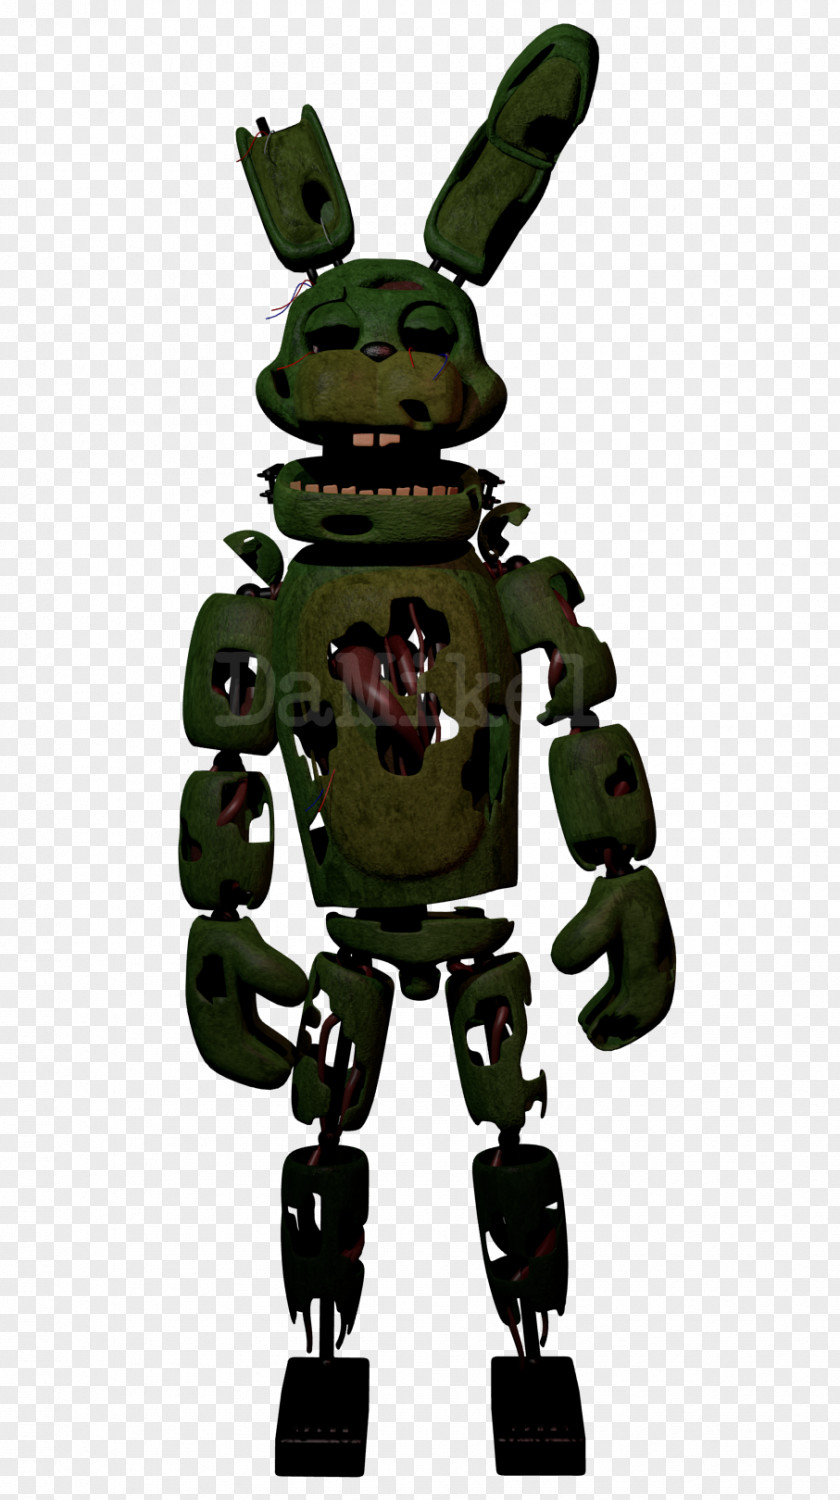 Bear Trap Five Nights At Freddy's 3 2 Jump Scare Art Game PNG